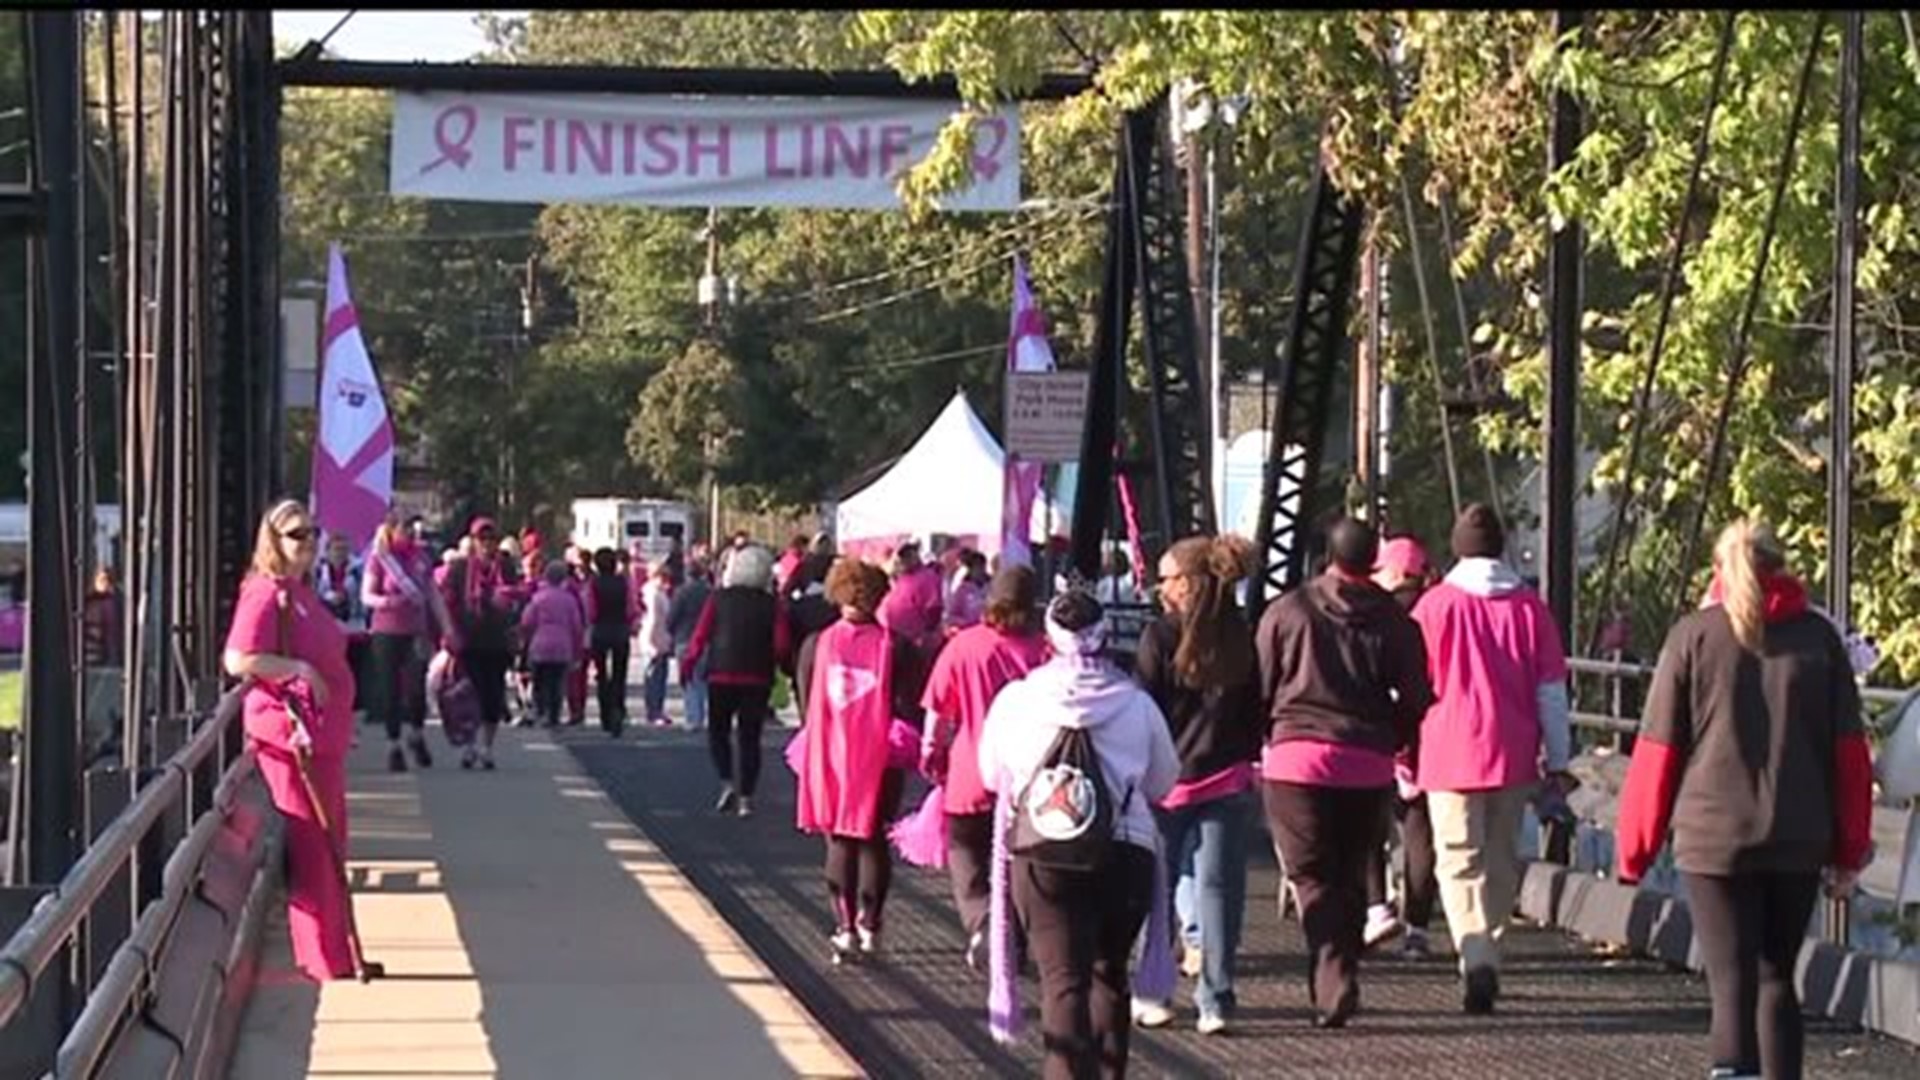 One of nation`s largest "Making Strides Against Breast Cancer" events held in Central Pennsylvania